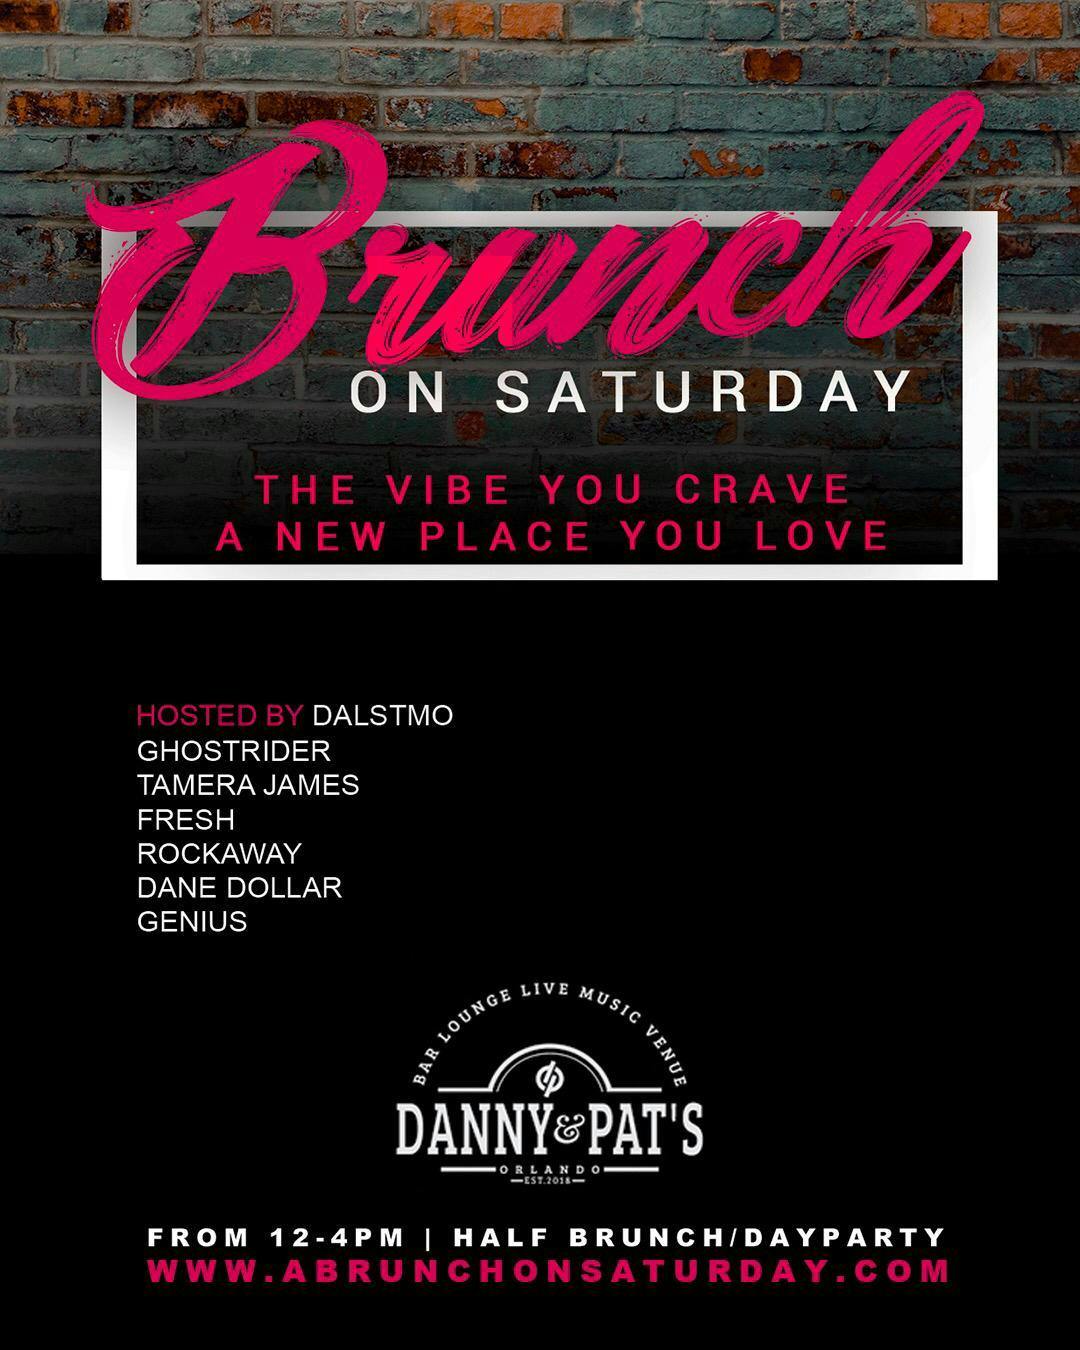 Brunch on Saturday - The Daytime Brunch Party - New Location